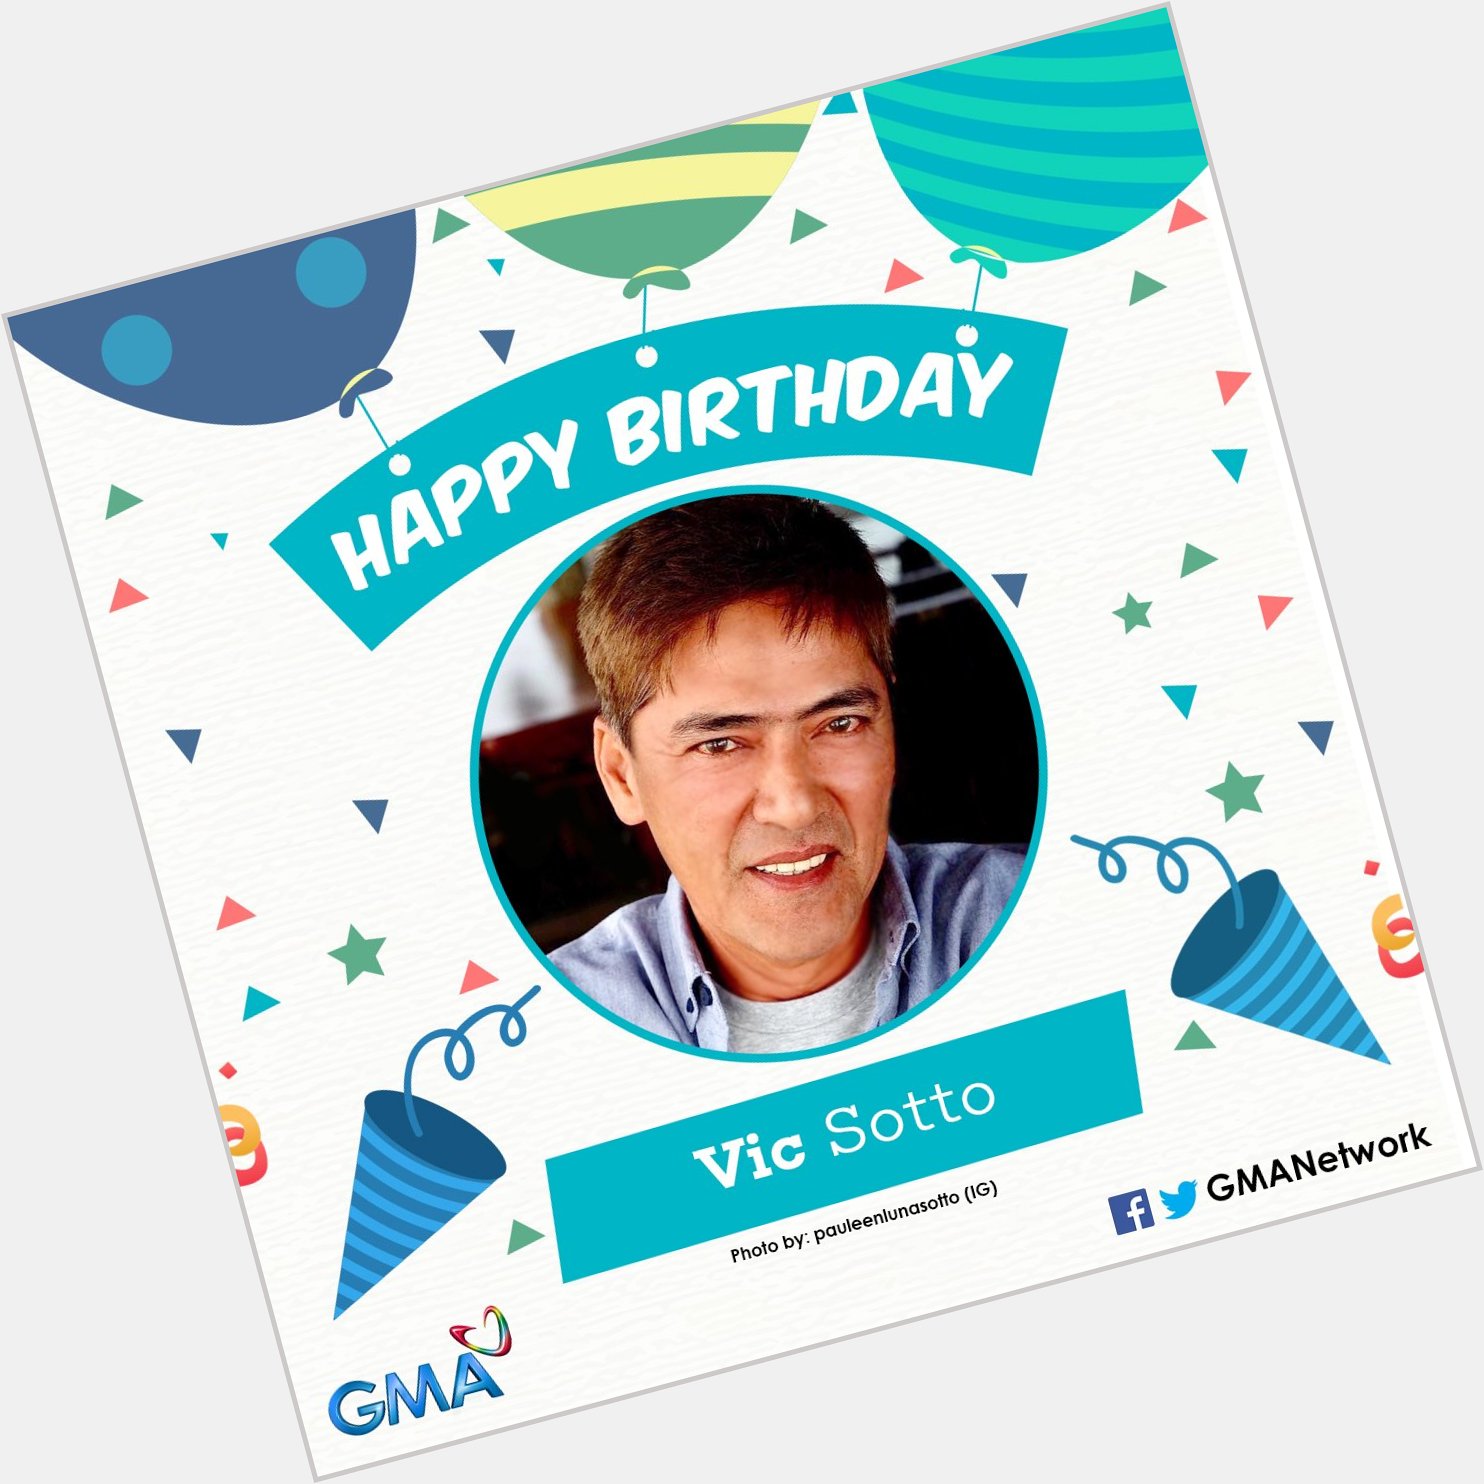 Happy birthday, Bossing Vic Sotto! 

May the joy you bring us everyday return to you tenfold! 